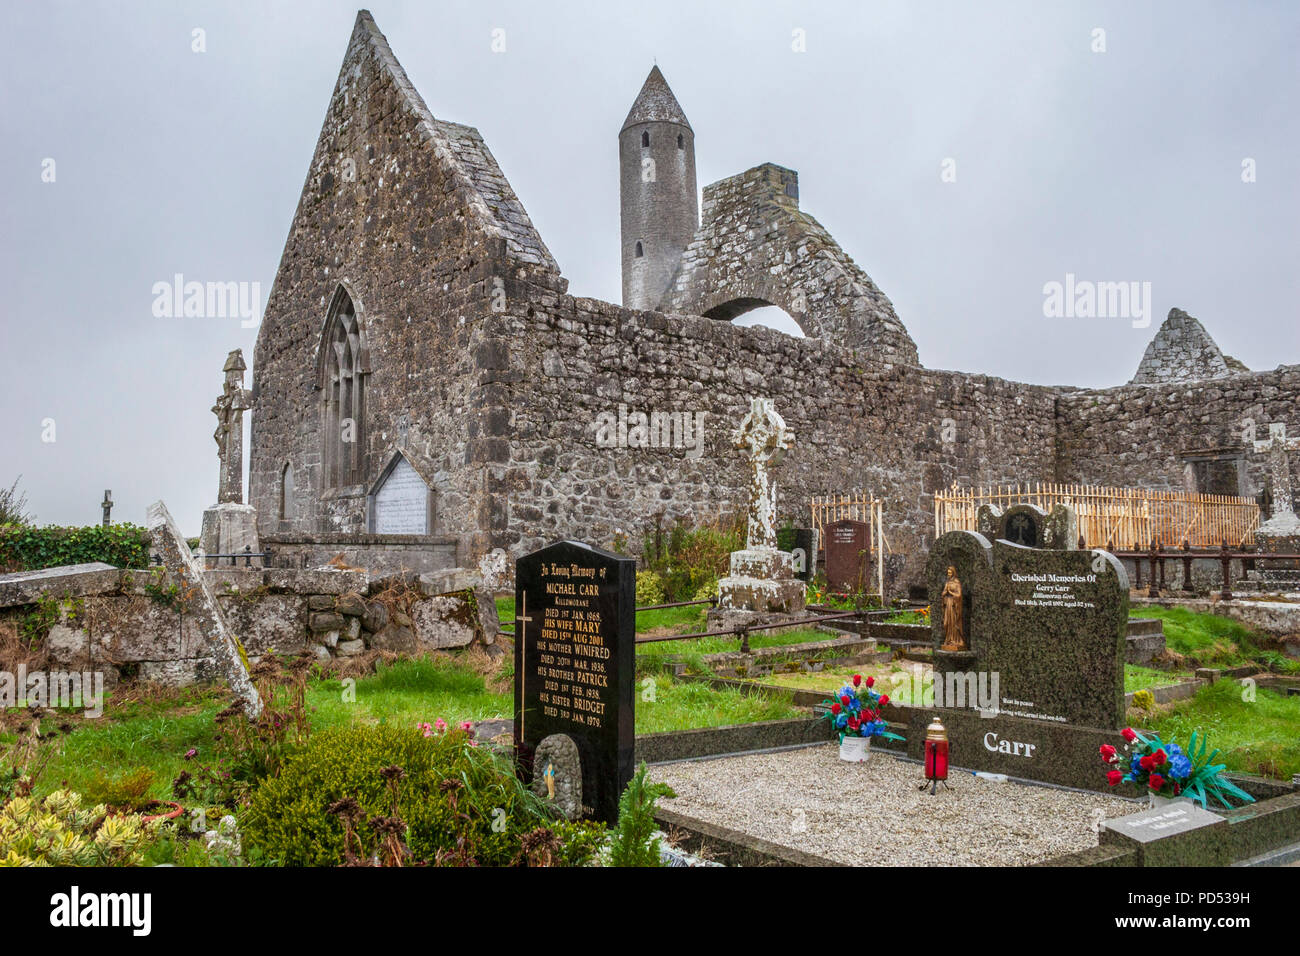 Kilmacduagh Abbey and Monastery, with Cemetary, near the town of Gort in County Galway, Ireland. Located in or near The Burrens. Stock Photo